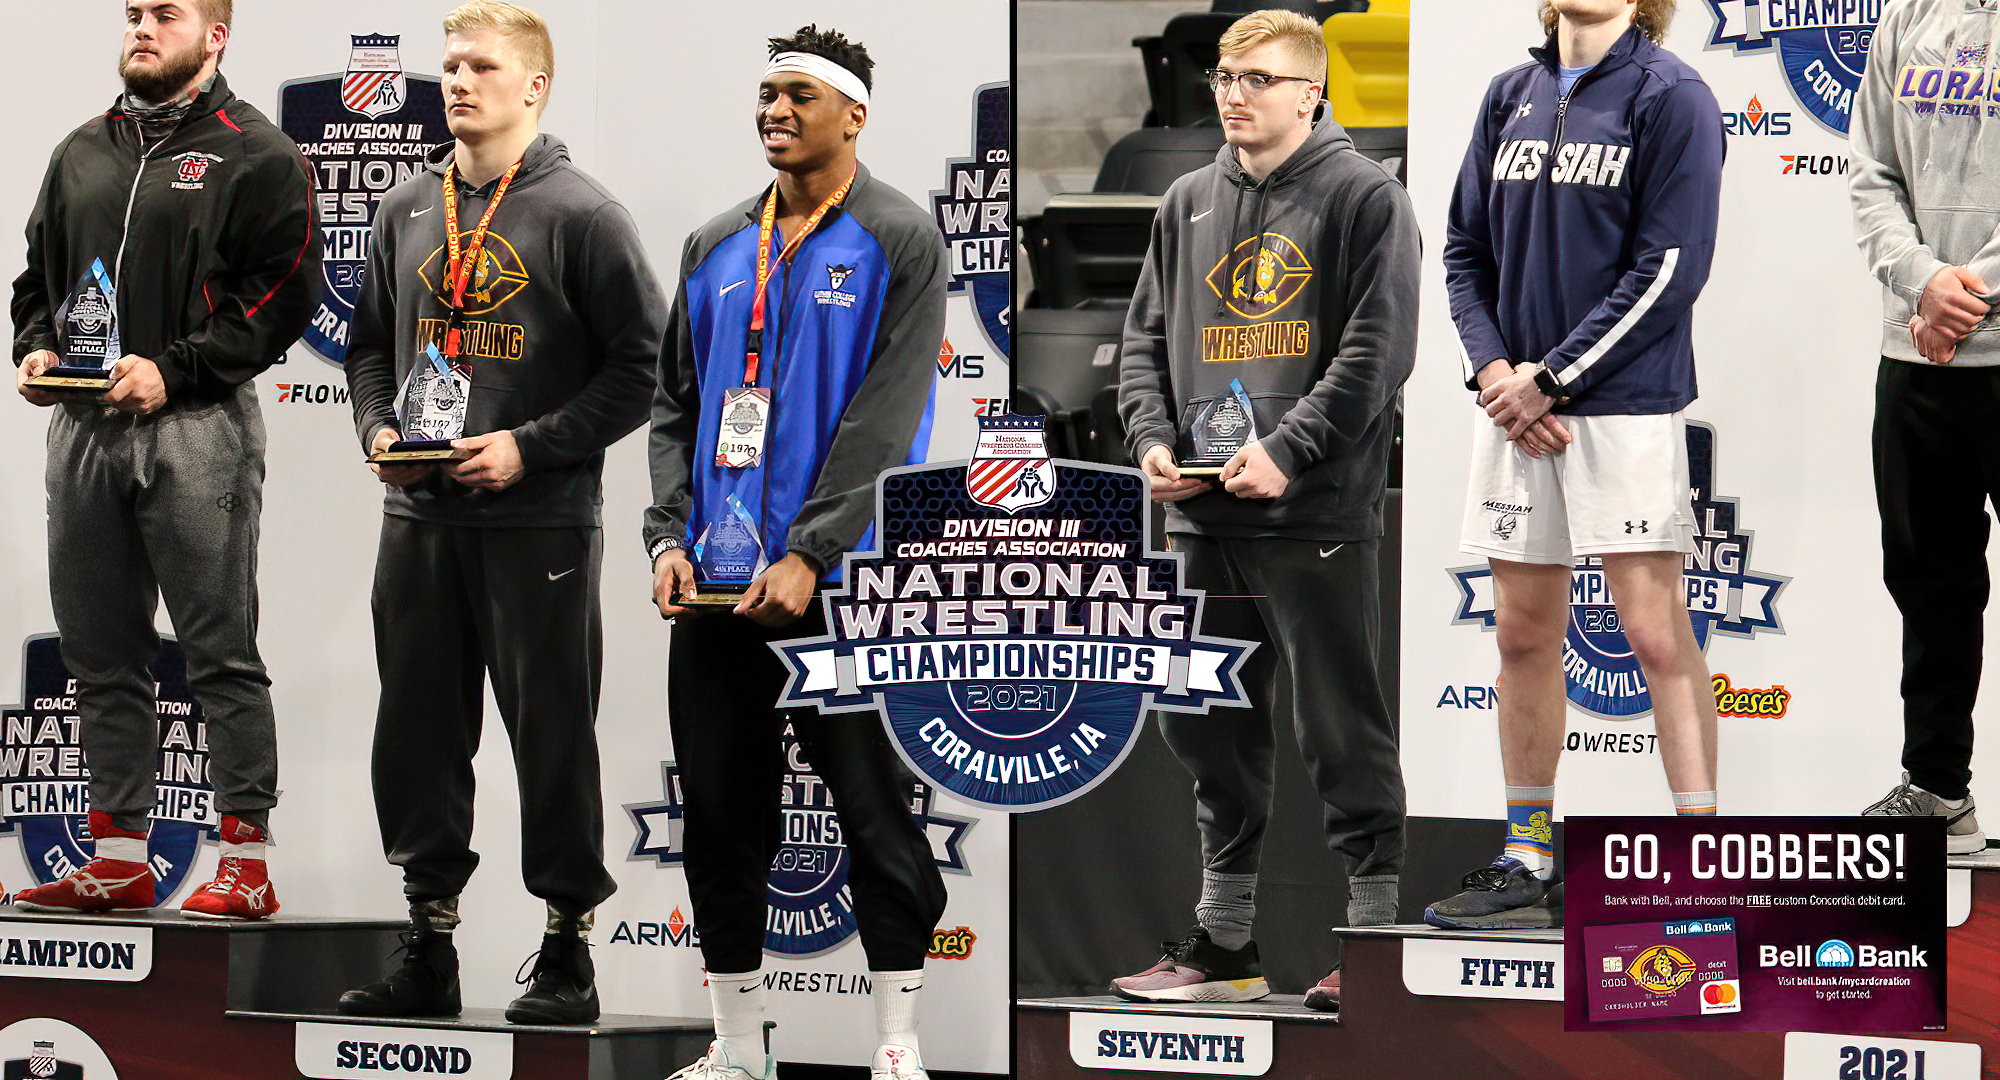 Gabe Zierden (L) and Alex Skaare became the first Cobber All-Americans as they finished in the Top 8 at the NWCA DIII National Meet. (Pics courtesy of Don Stoner, Augsburg SID).